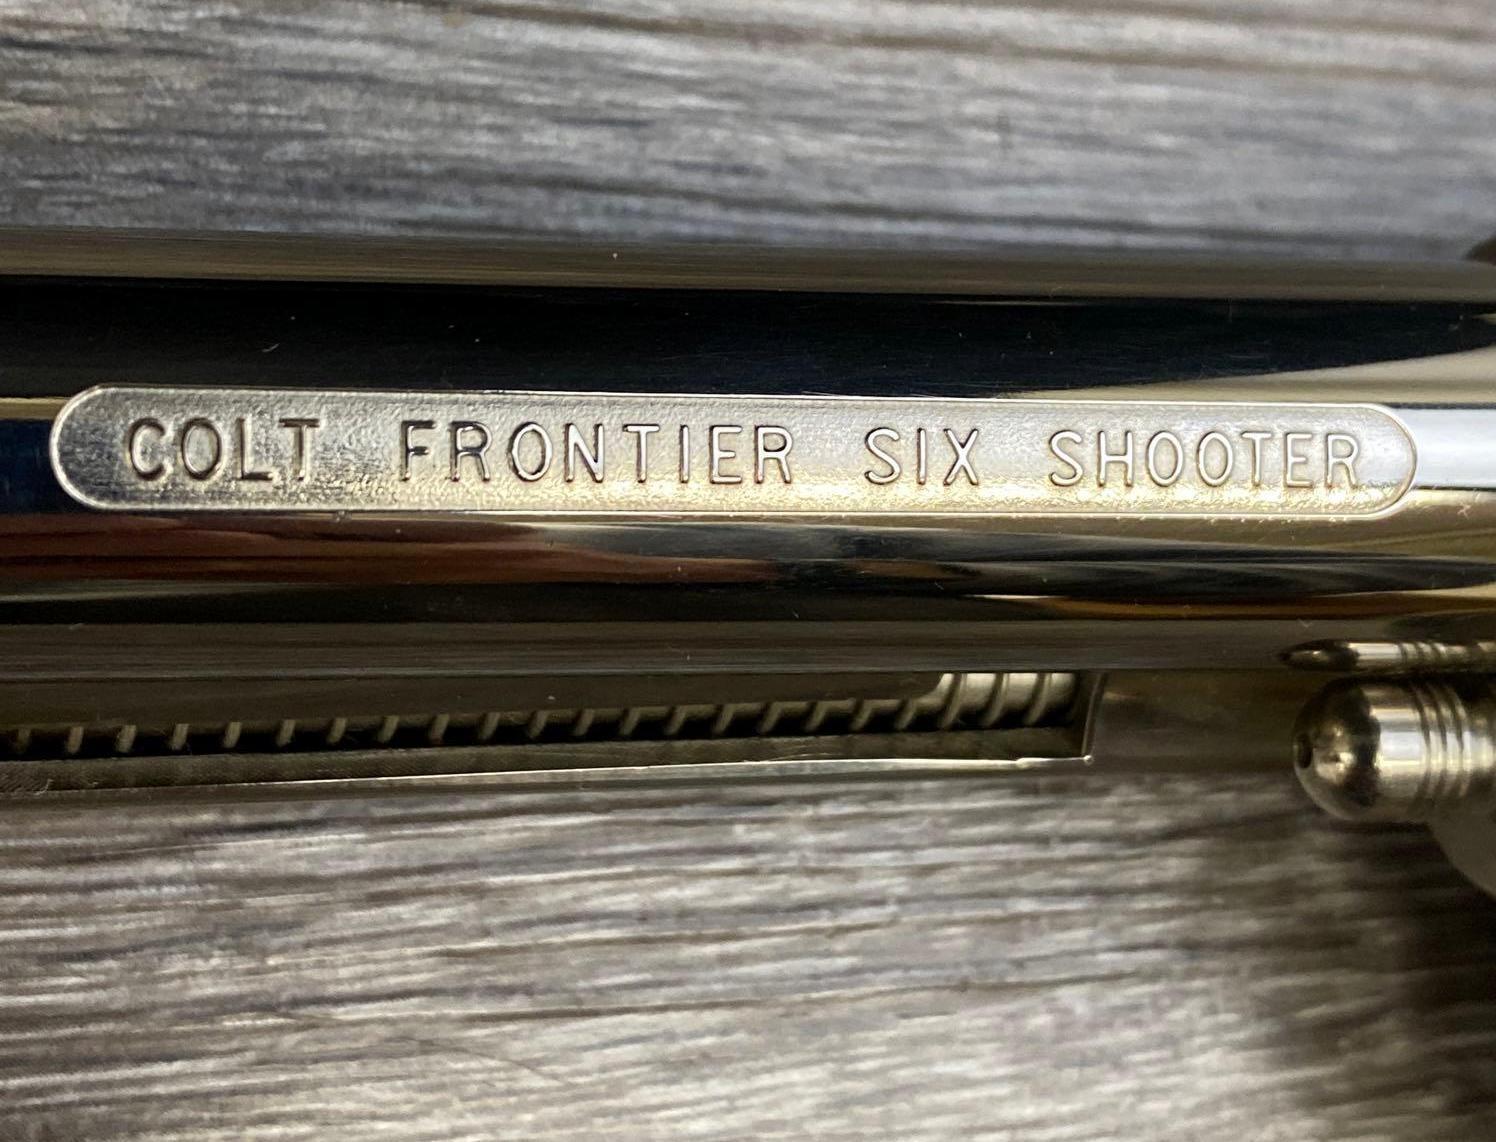 COLT SAA PEACEMAKER COMMEMORATIVE 100 YEAR BOXED SET .45 COLT